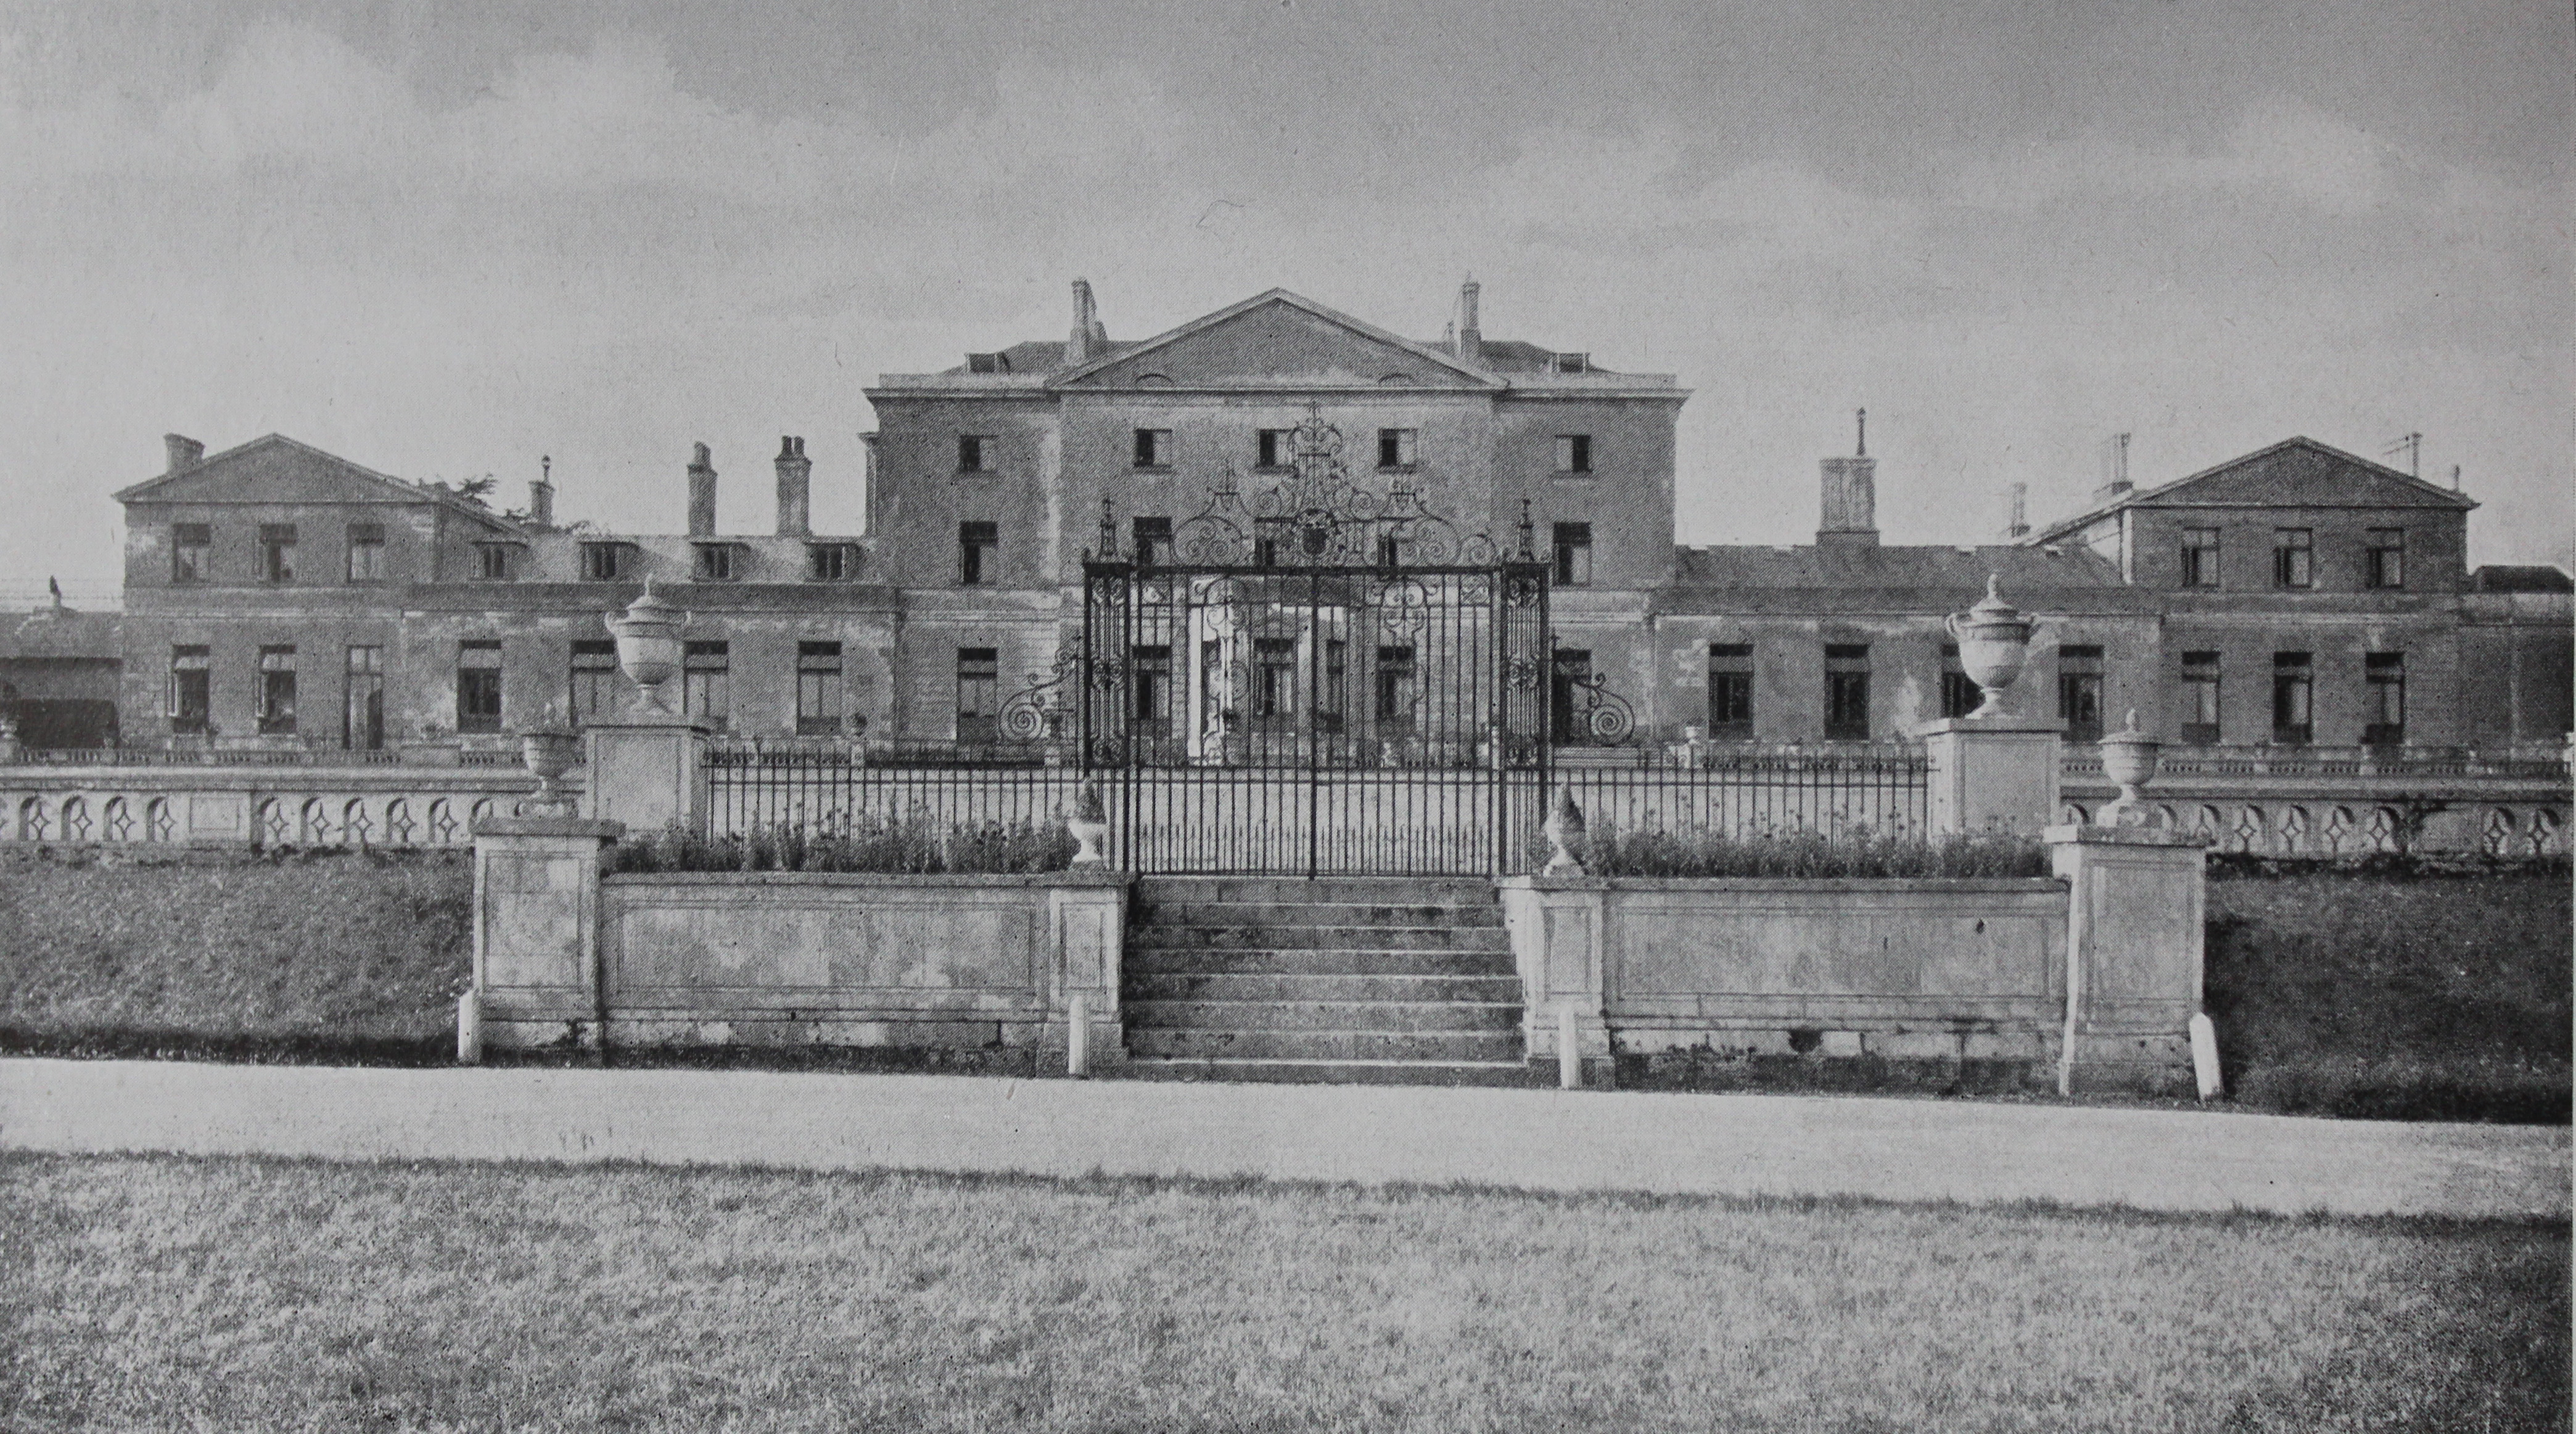 Henry Holland's Southill Park in Bedfordshire